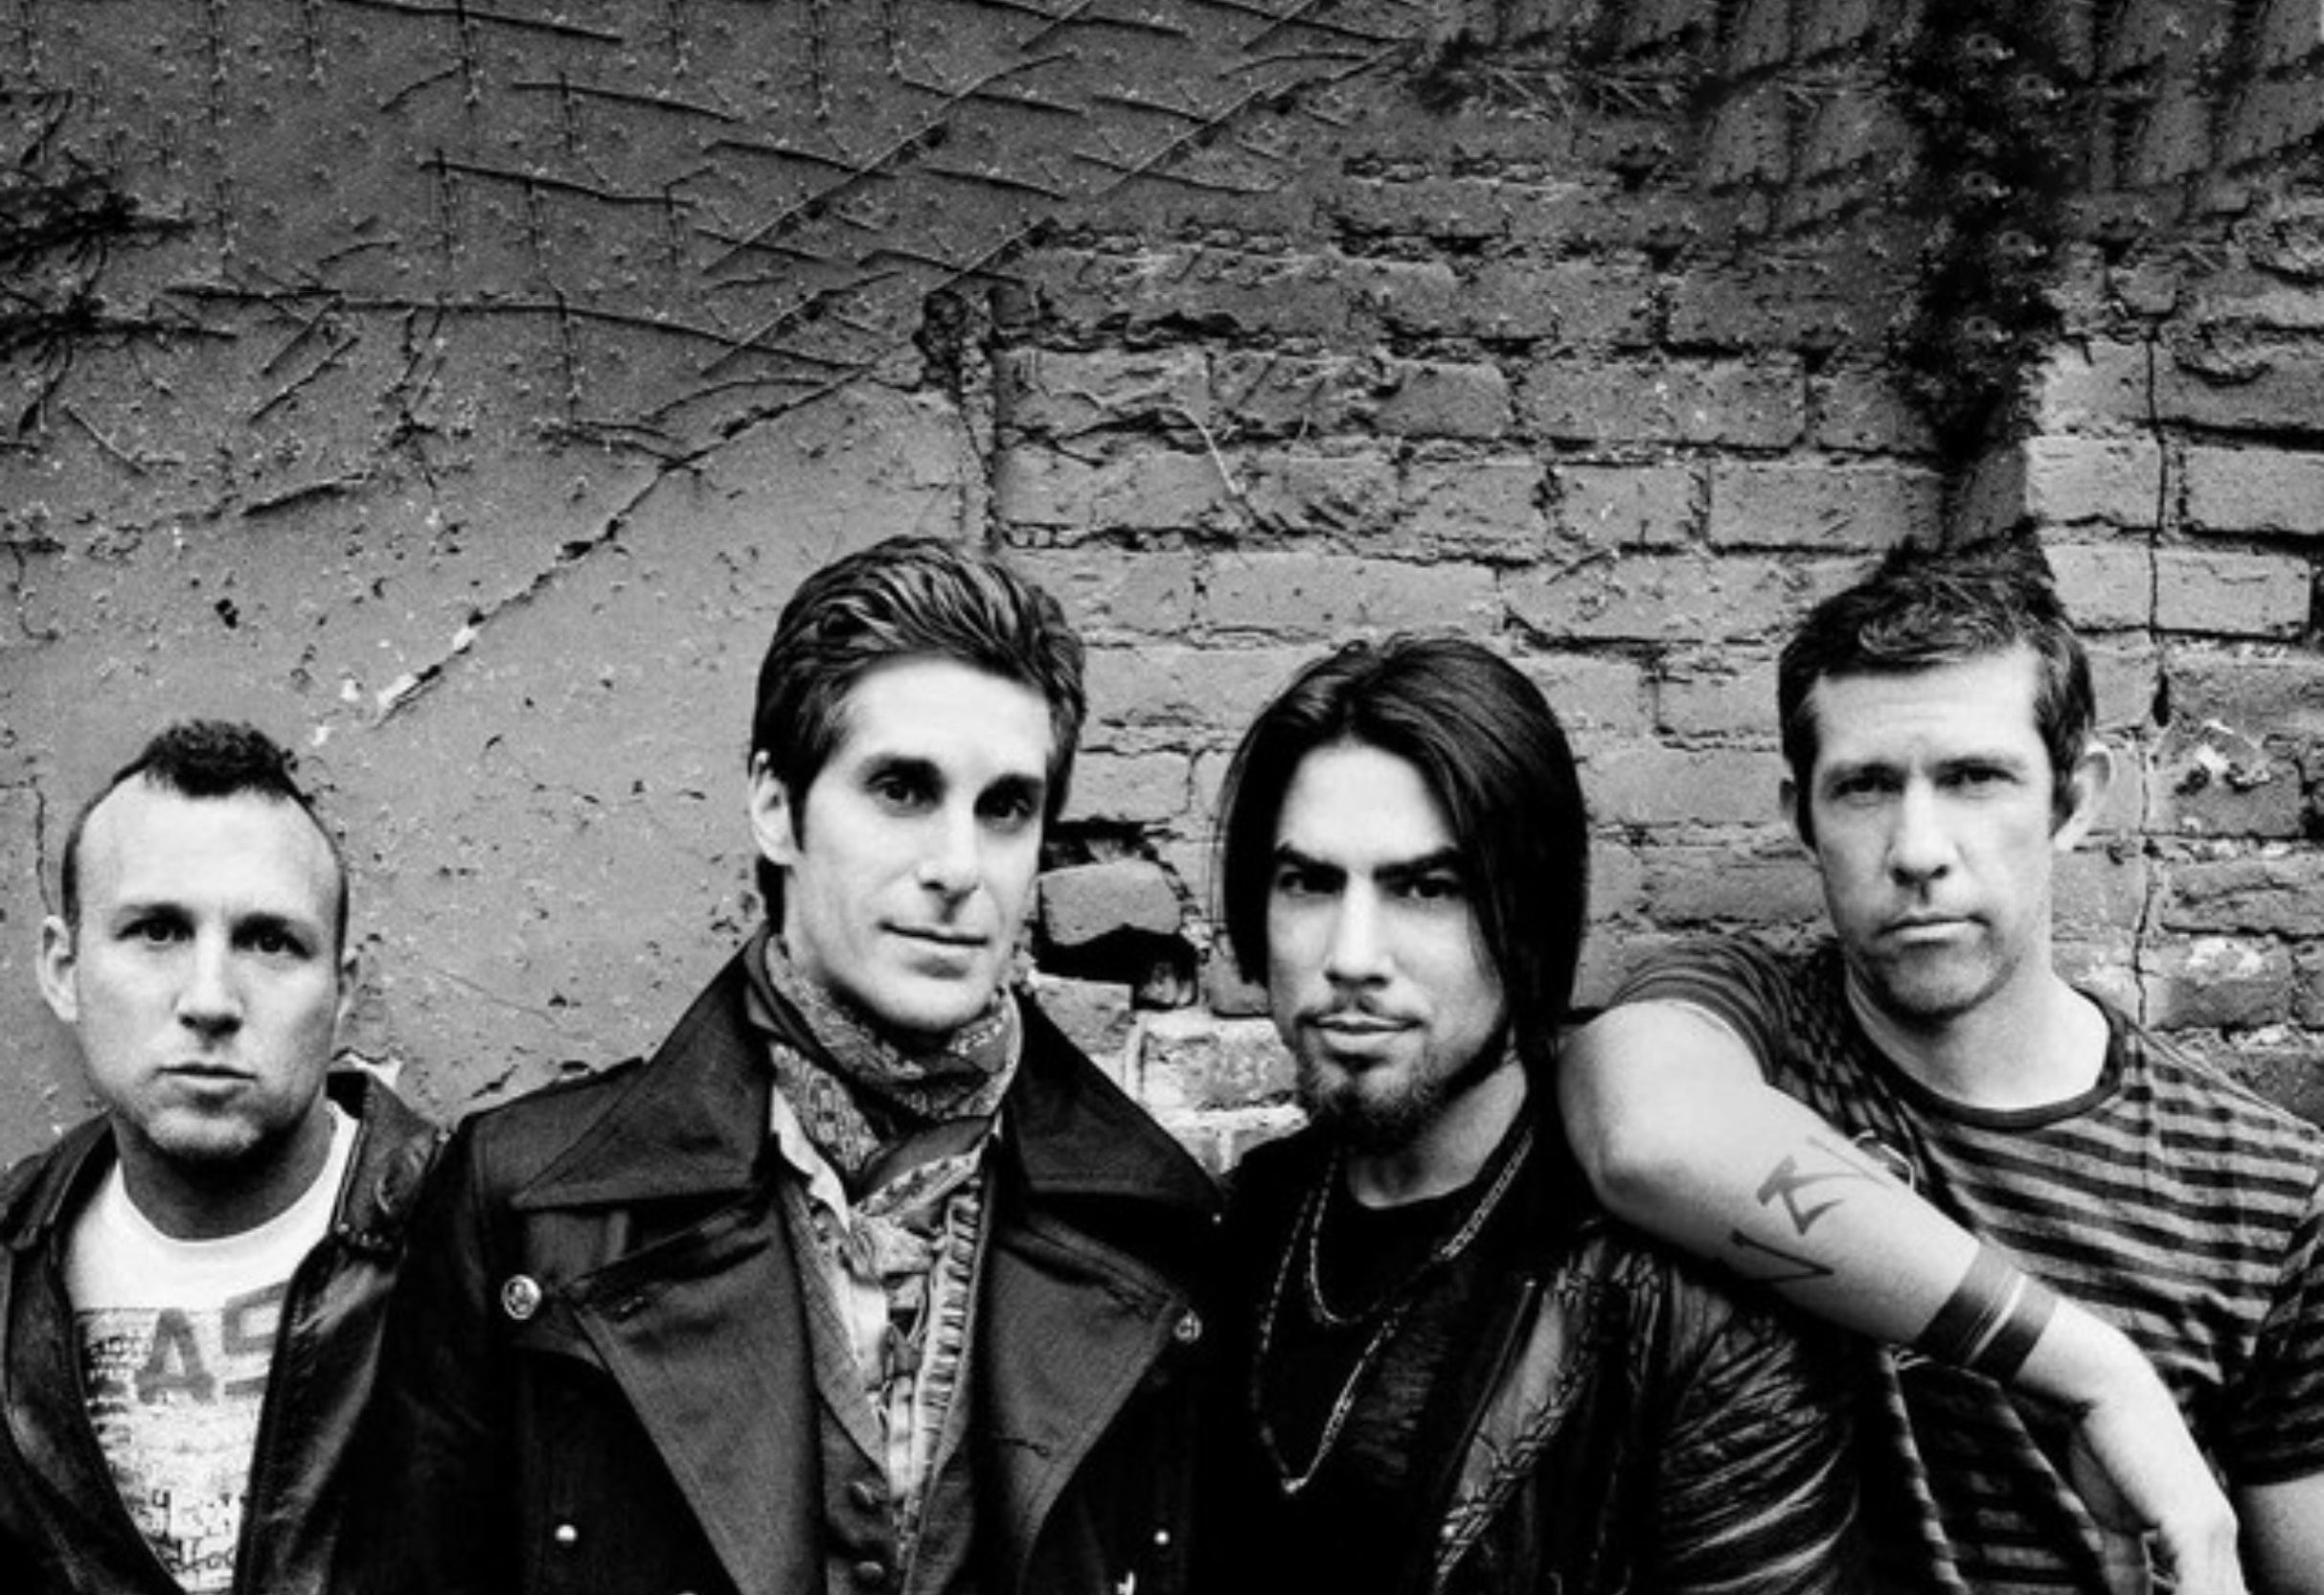 members only presale password for Jane's Addiction & Love and Rockets tickets in Las Vegas at Fontainebleau